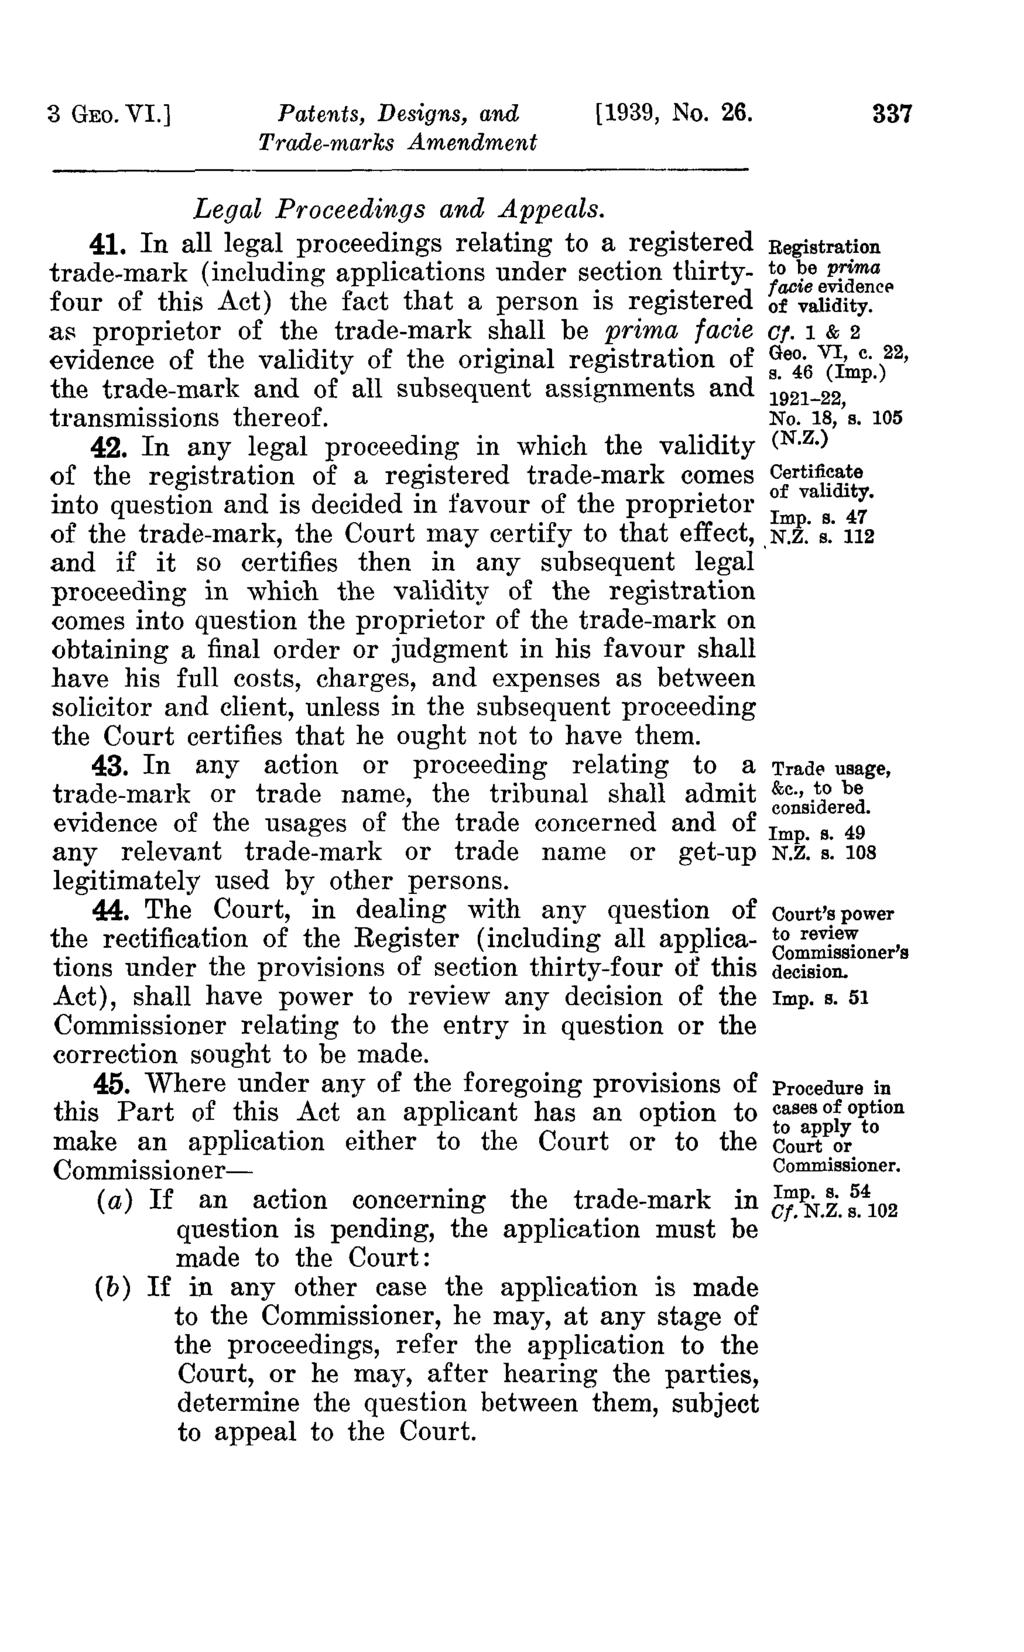 3 GEO. VI.] Patents, Designs, and [1939, No. 26. 337 Legal Proceedings and Appeals. 41.